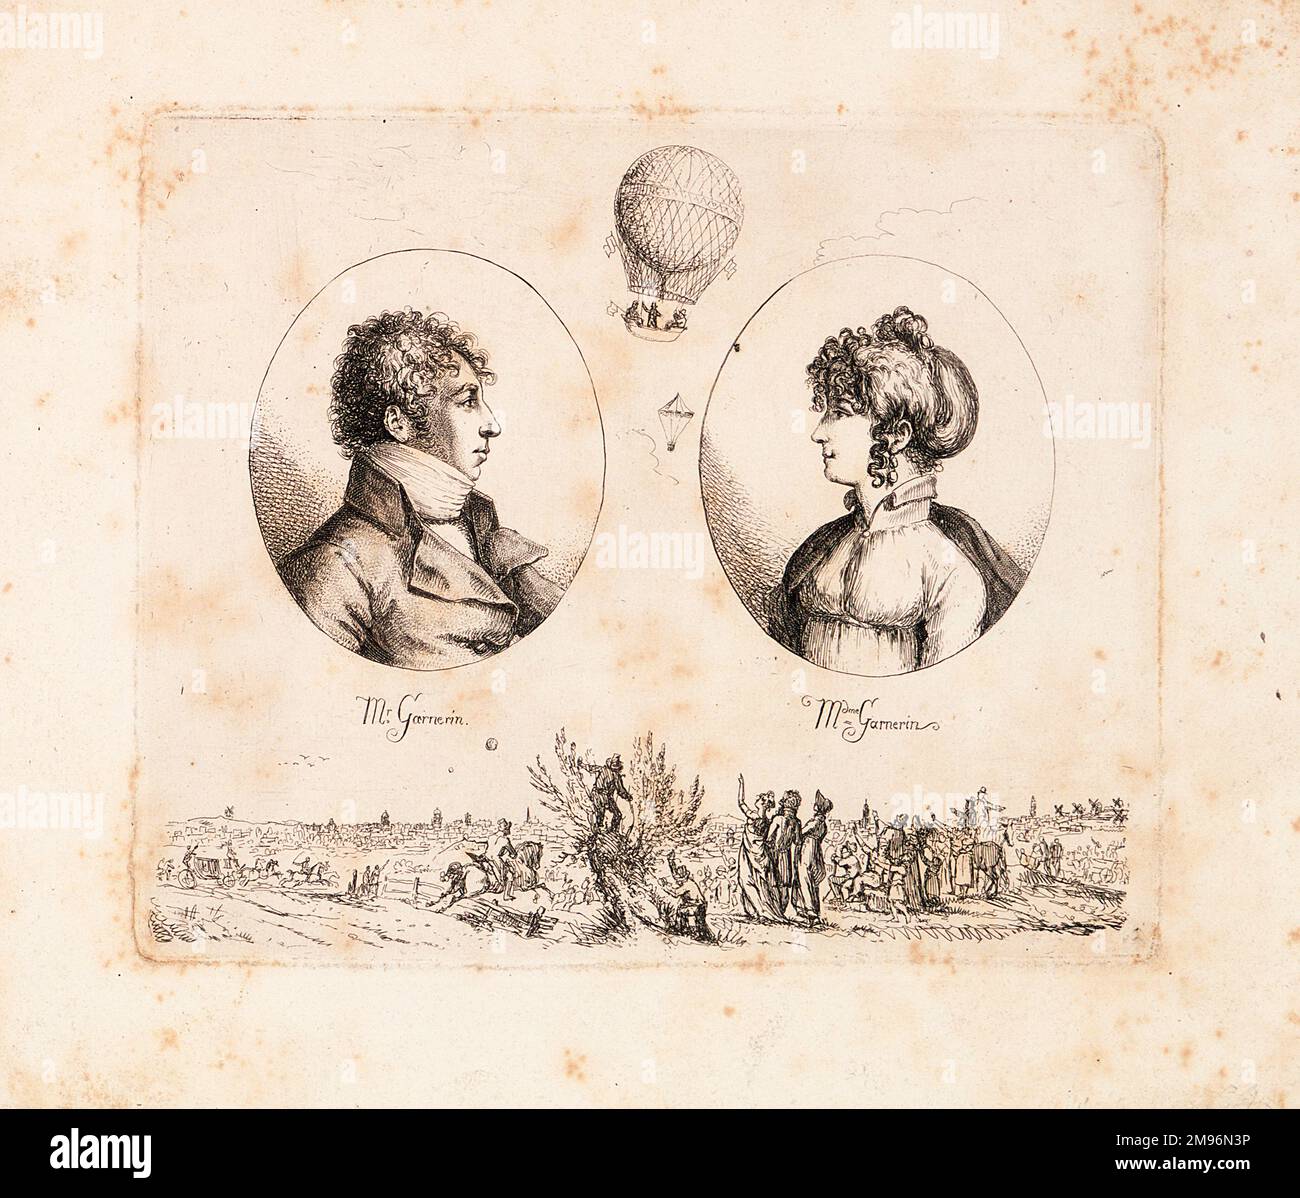 Head and shoulders portraits of Andre-Jacques and Jeanne-Genevieve Garnerin, French ballooning couple, with a small balloon and parachute between them and a scene of spectators below. Stock Photo